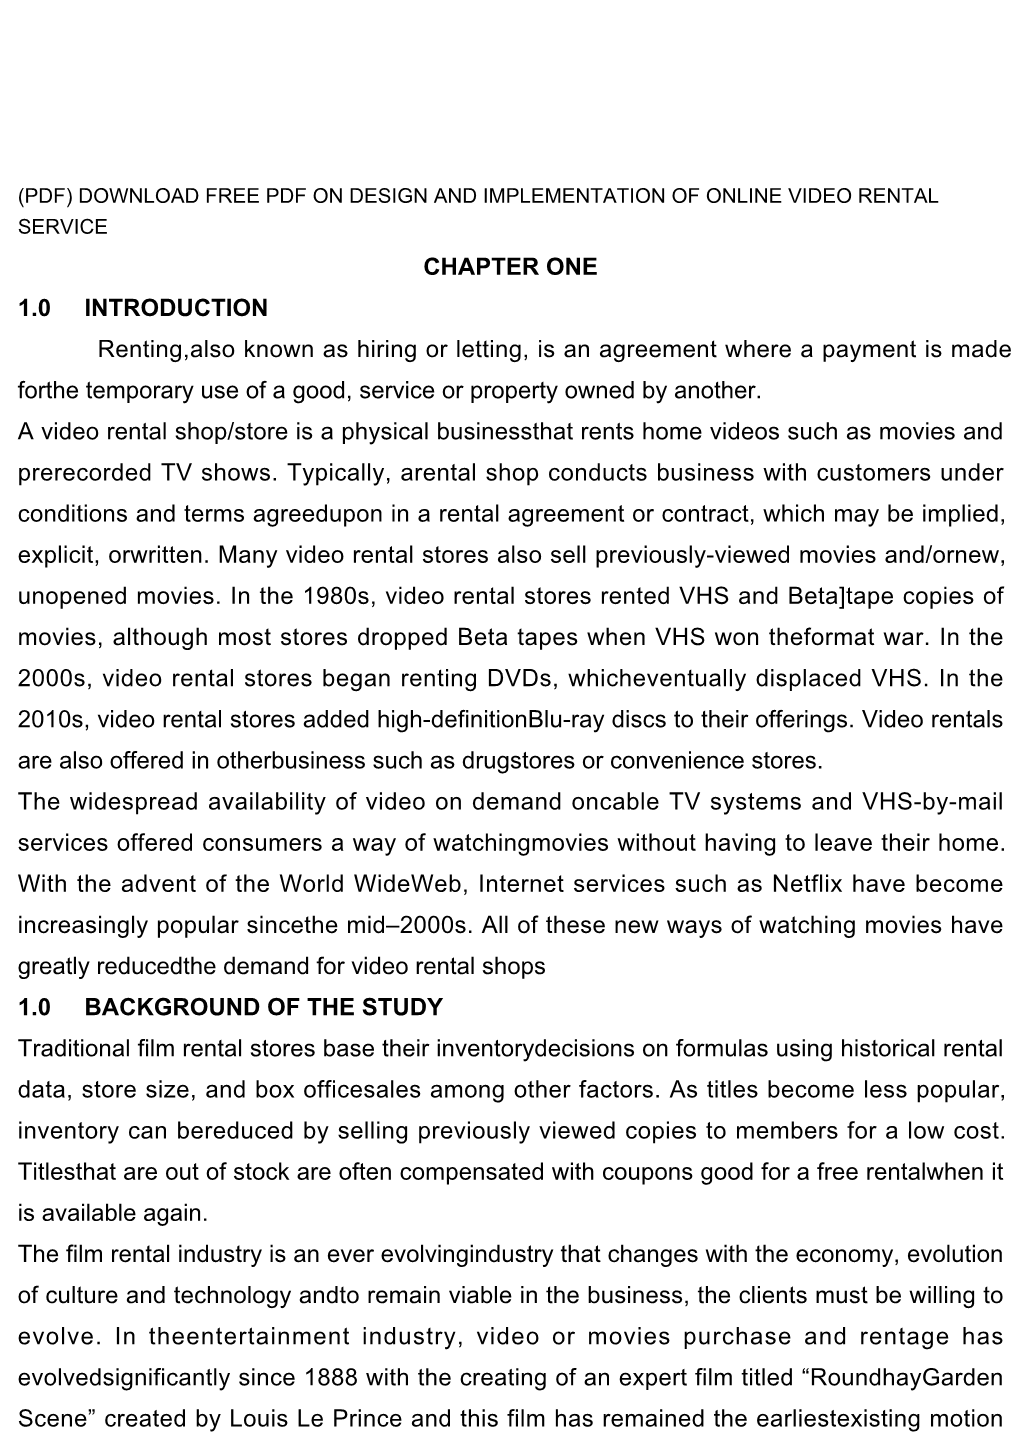 CHAPTER ONE 1.0 INTRODUCTION Renting,Also Known As Hiring Or